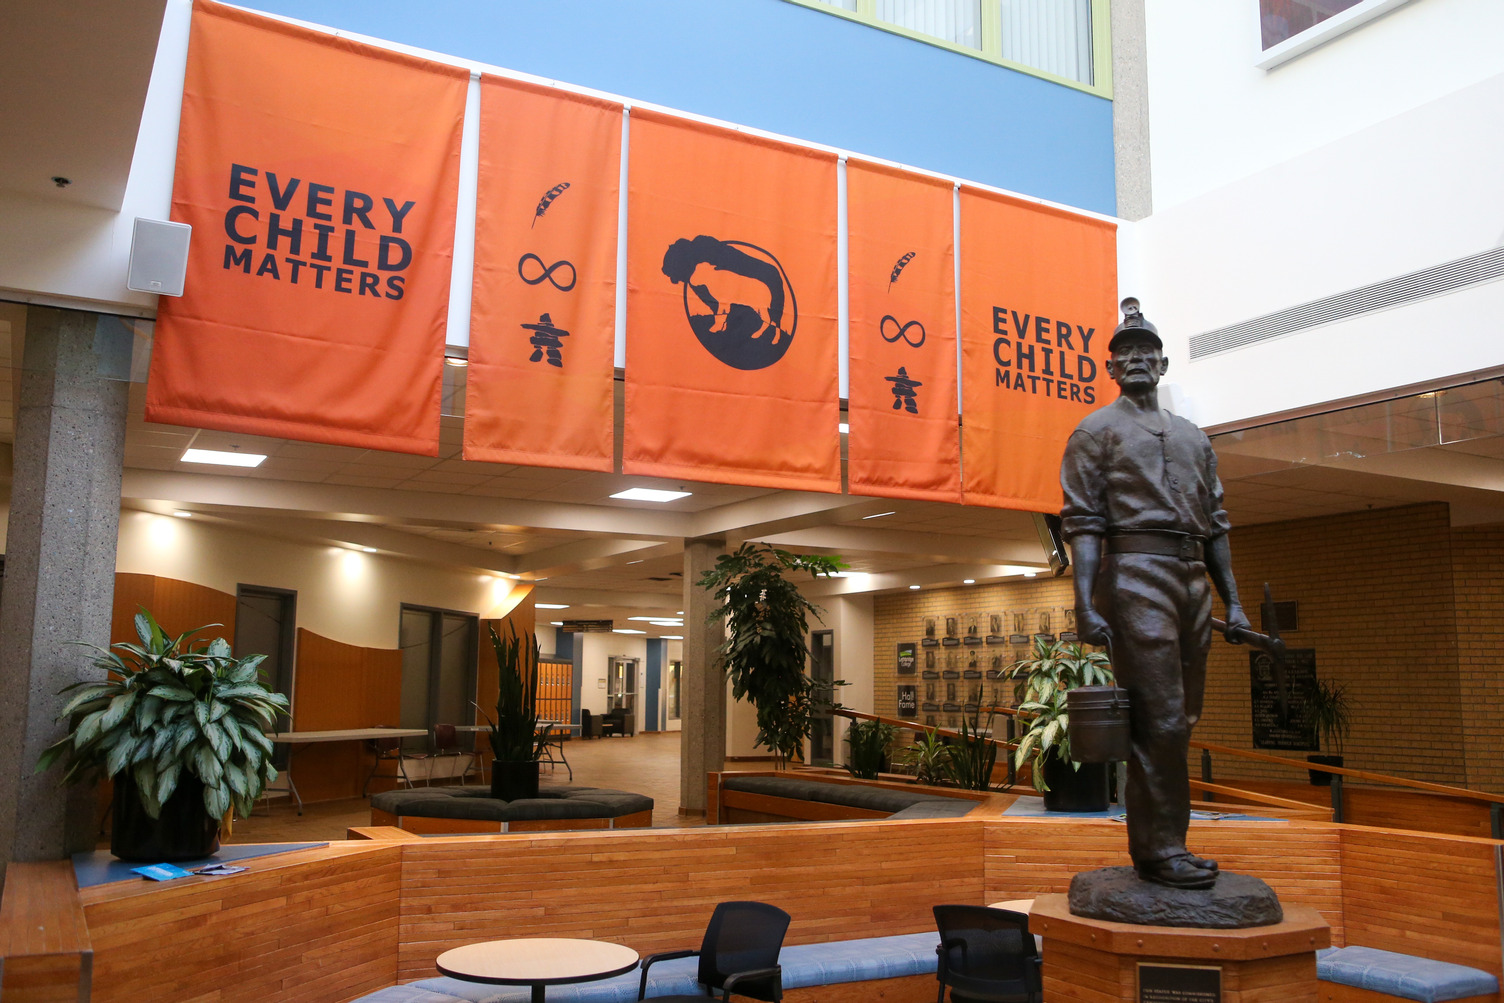 Orange "Every Child Matters" banners hang in Lethbridge College's Centre Core.